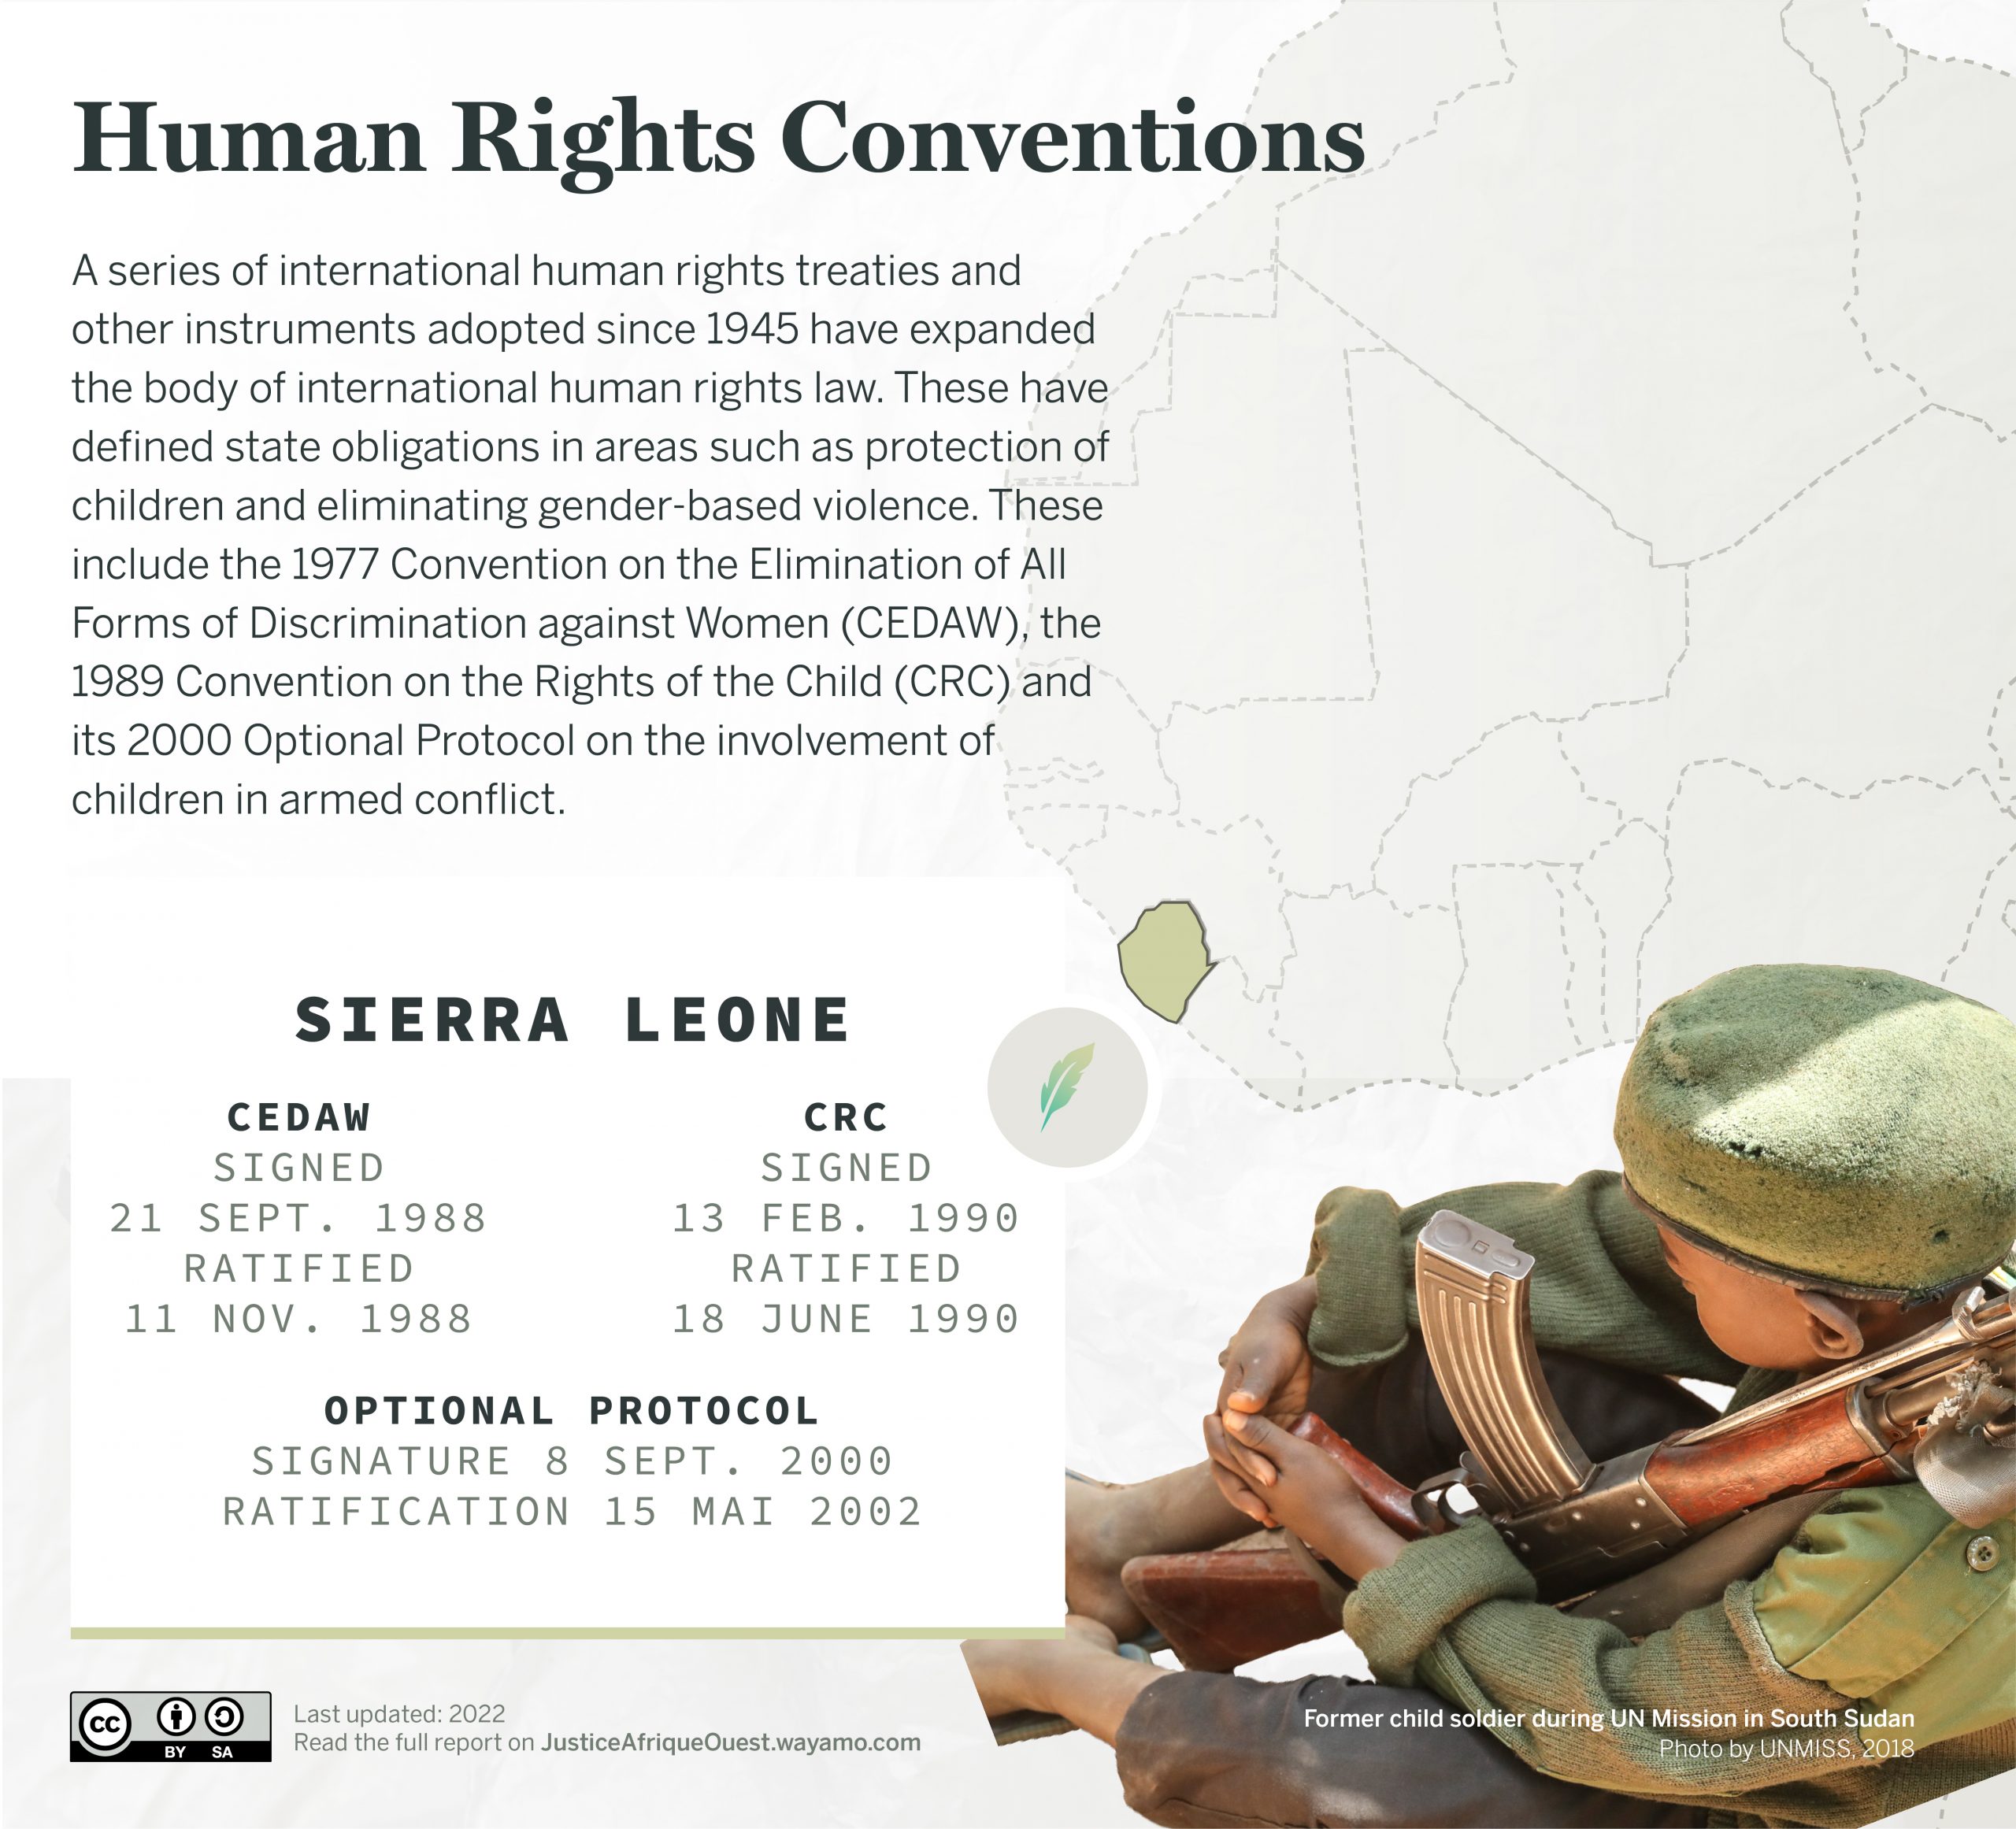 v1_SIERRALEONE_Human Rights Conventions_2